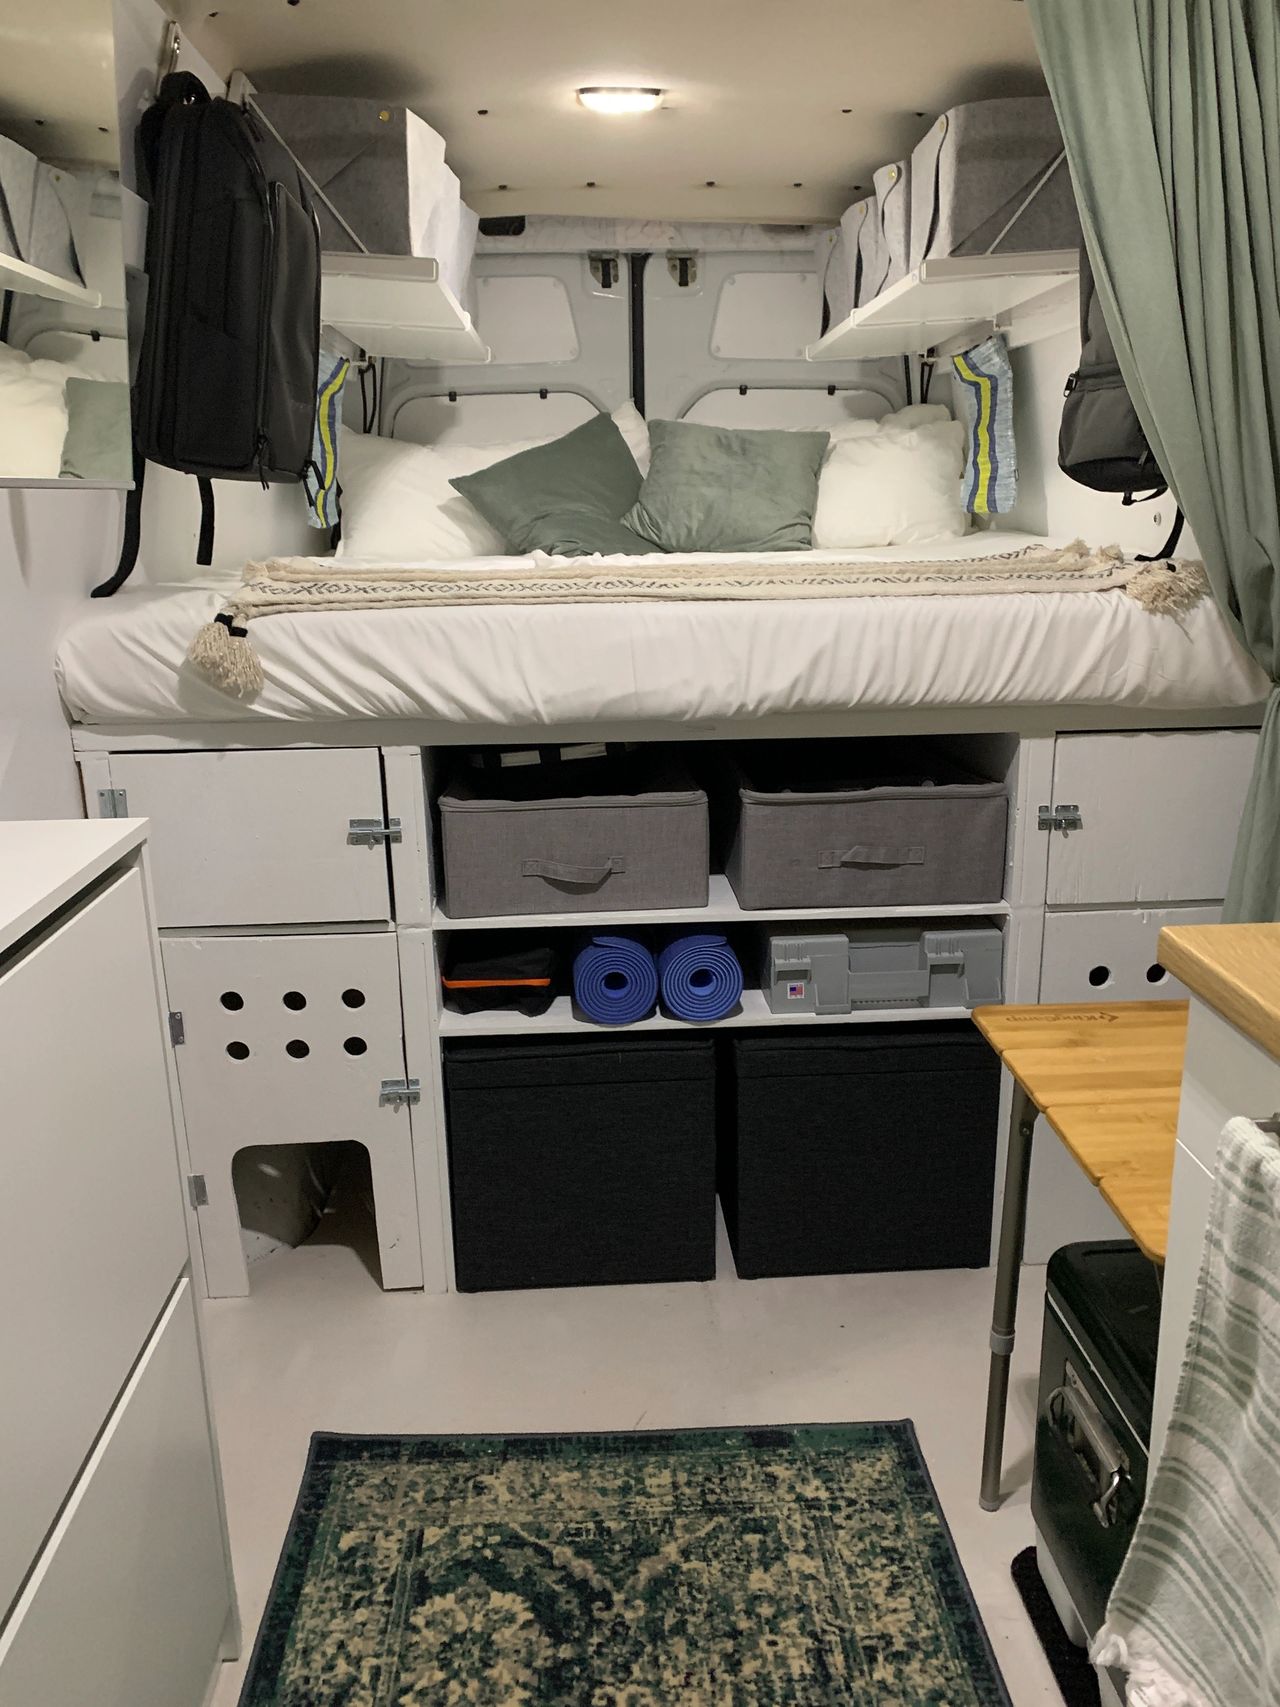 Interior of van with bed in the back, set up for van life with chronic illness.